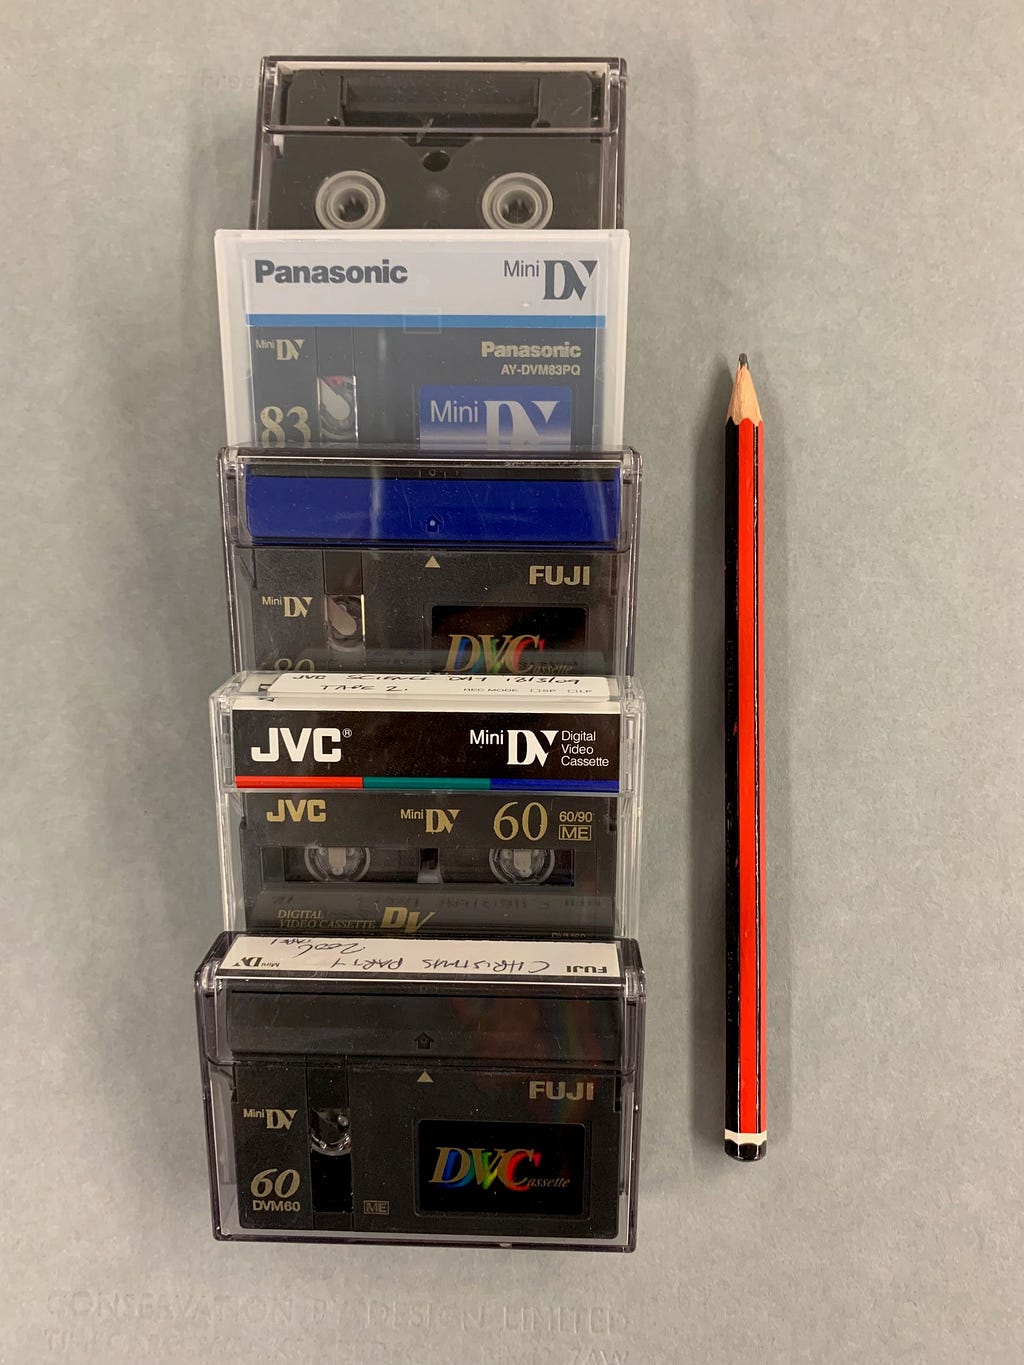 set of mini digital video tapes next to a pencil demonstrating their small size